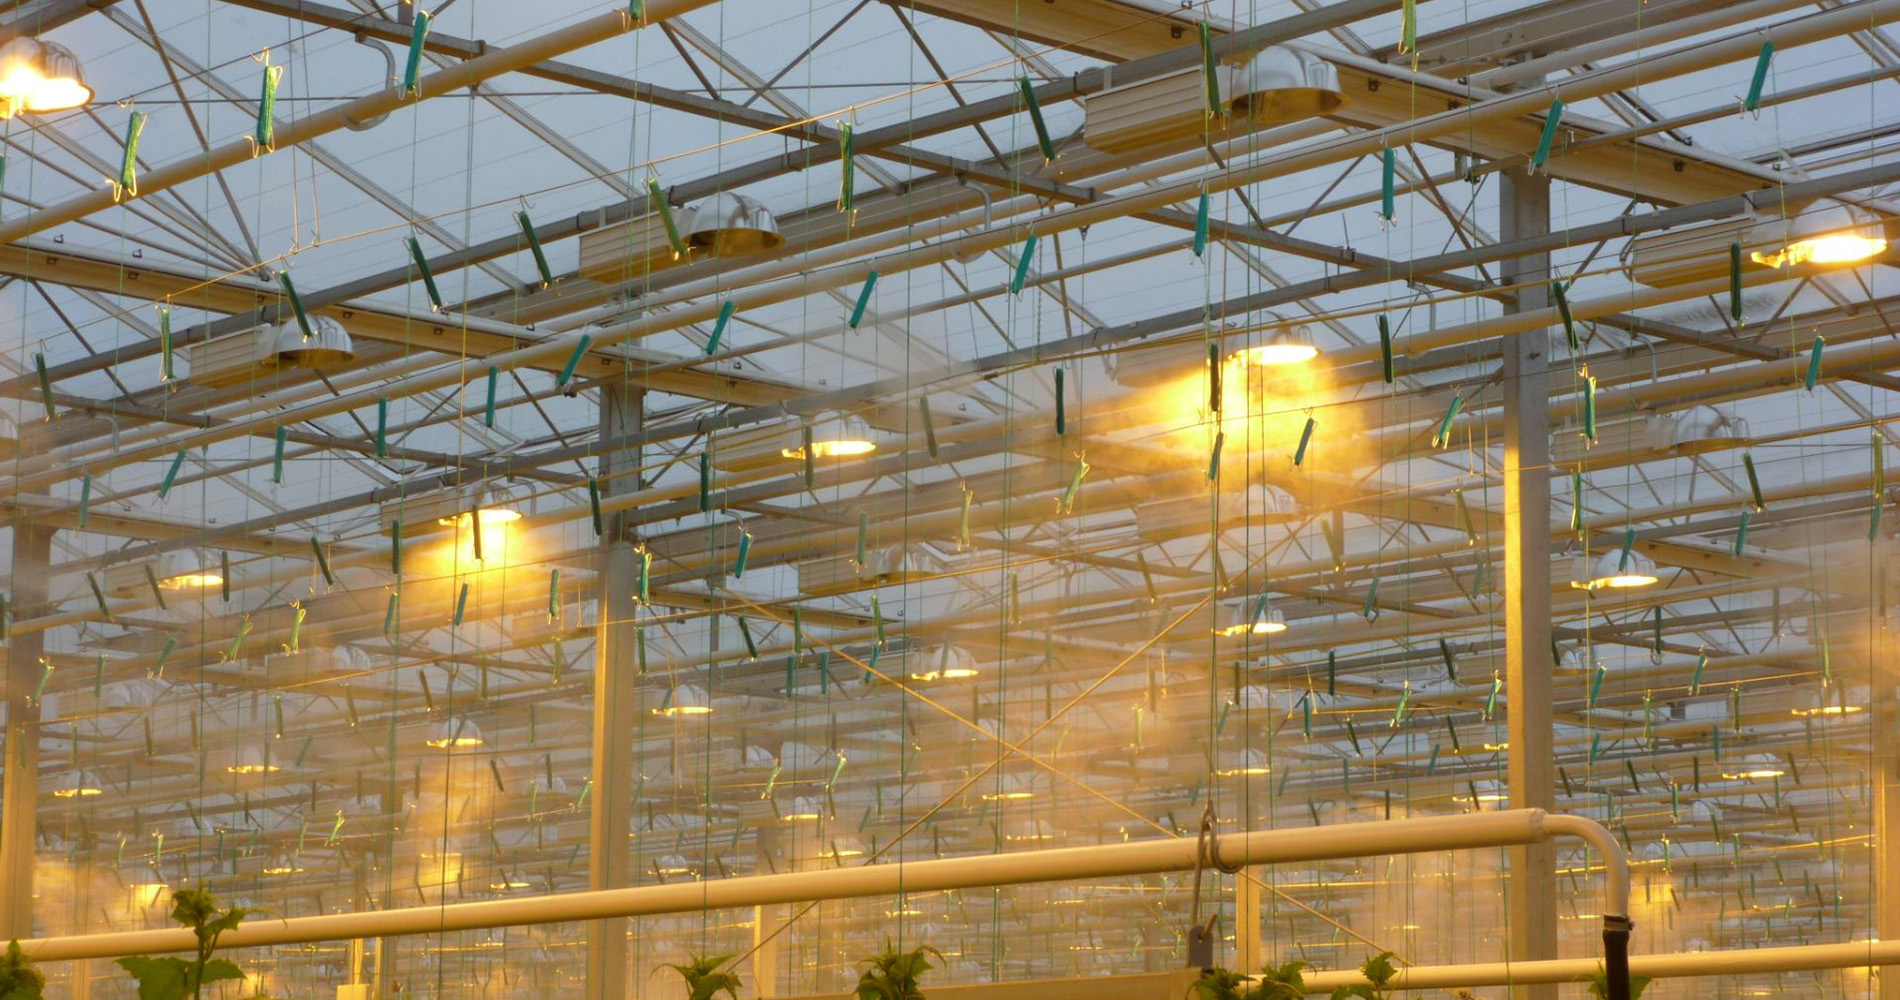 High pressure misting system for greenhouses